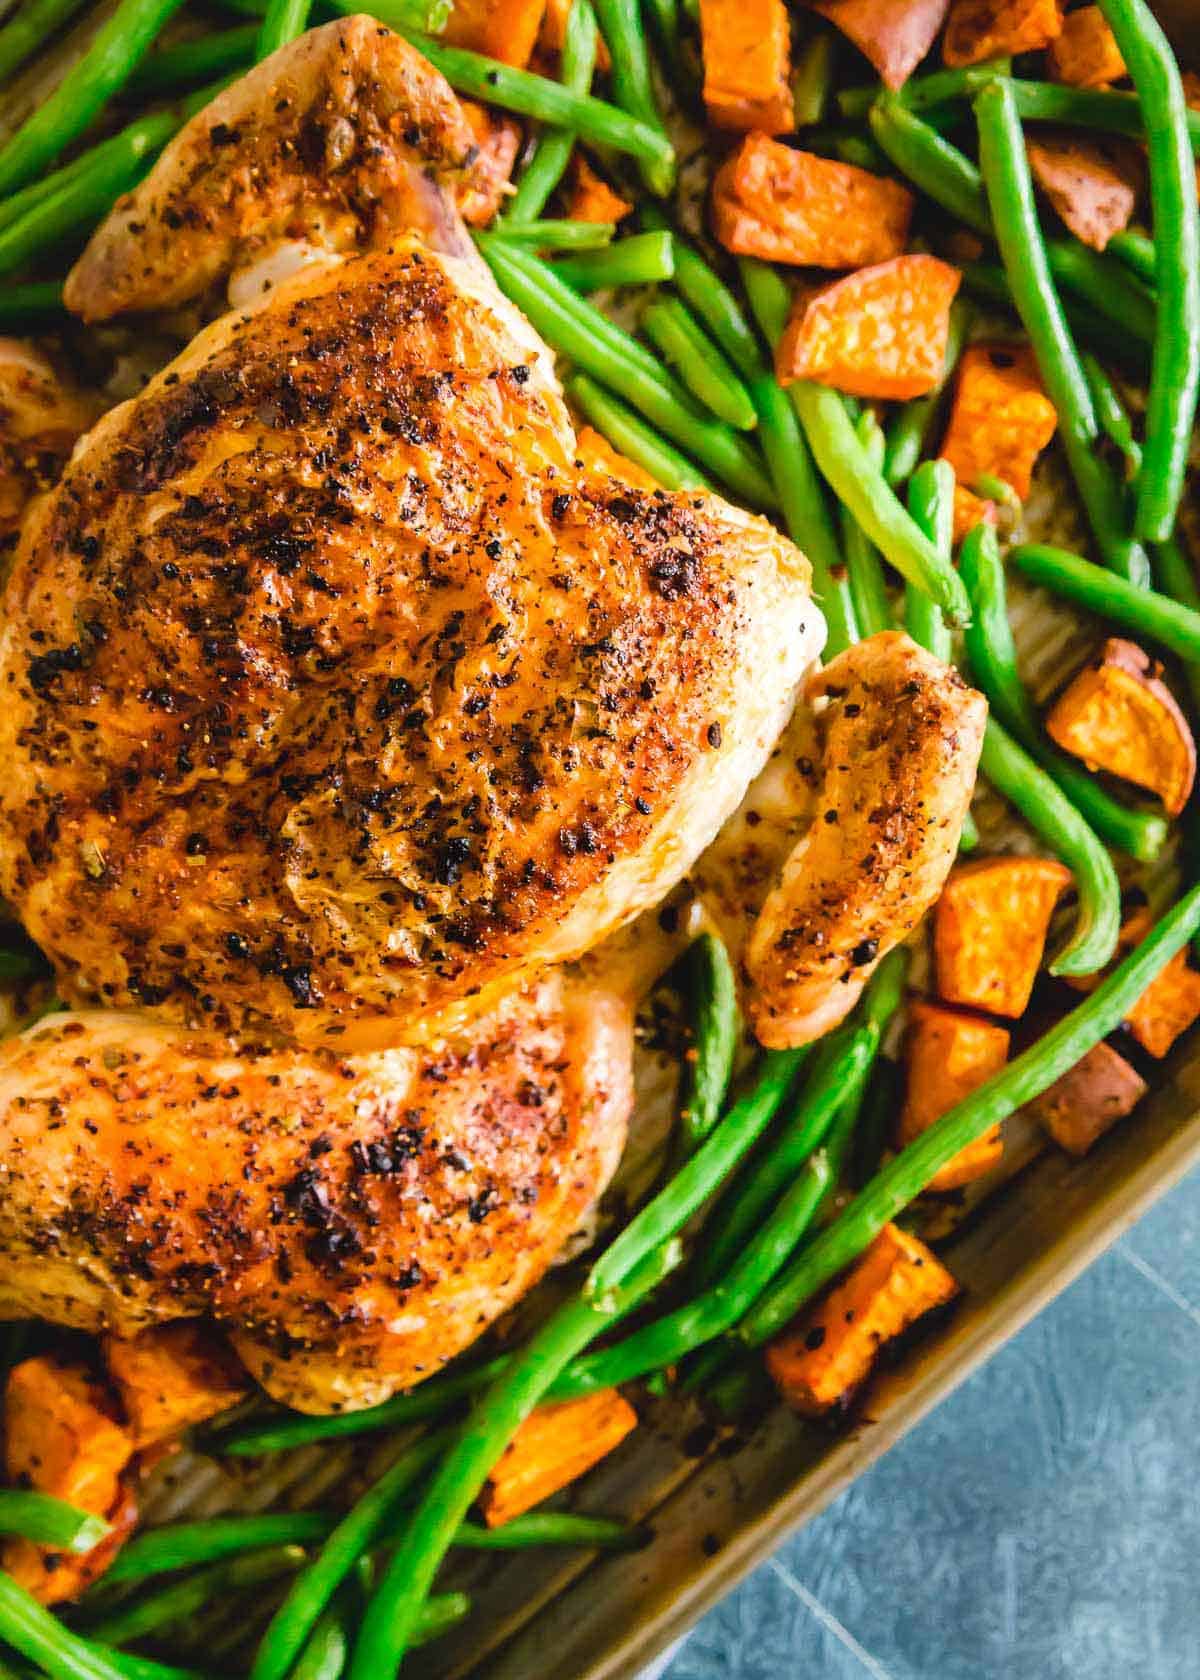 Spatchcock piri piri roasted chicken recipe with green beans and sweet potatoes.